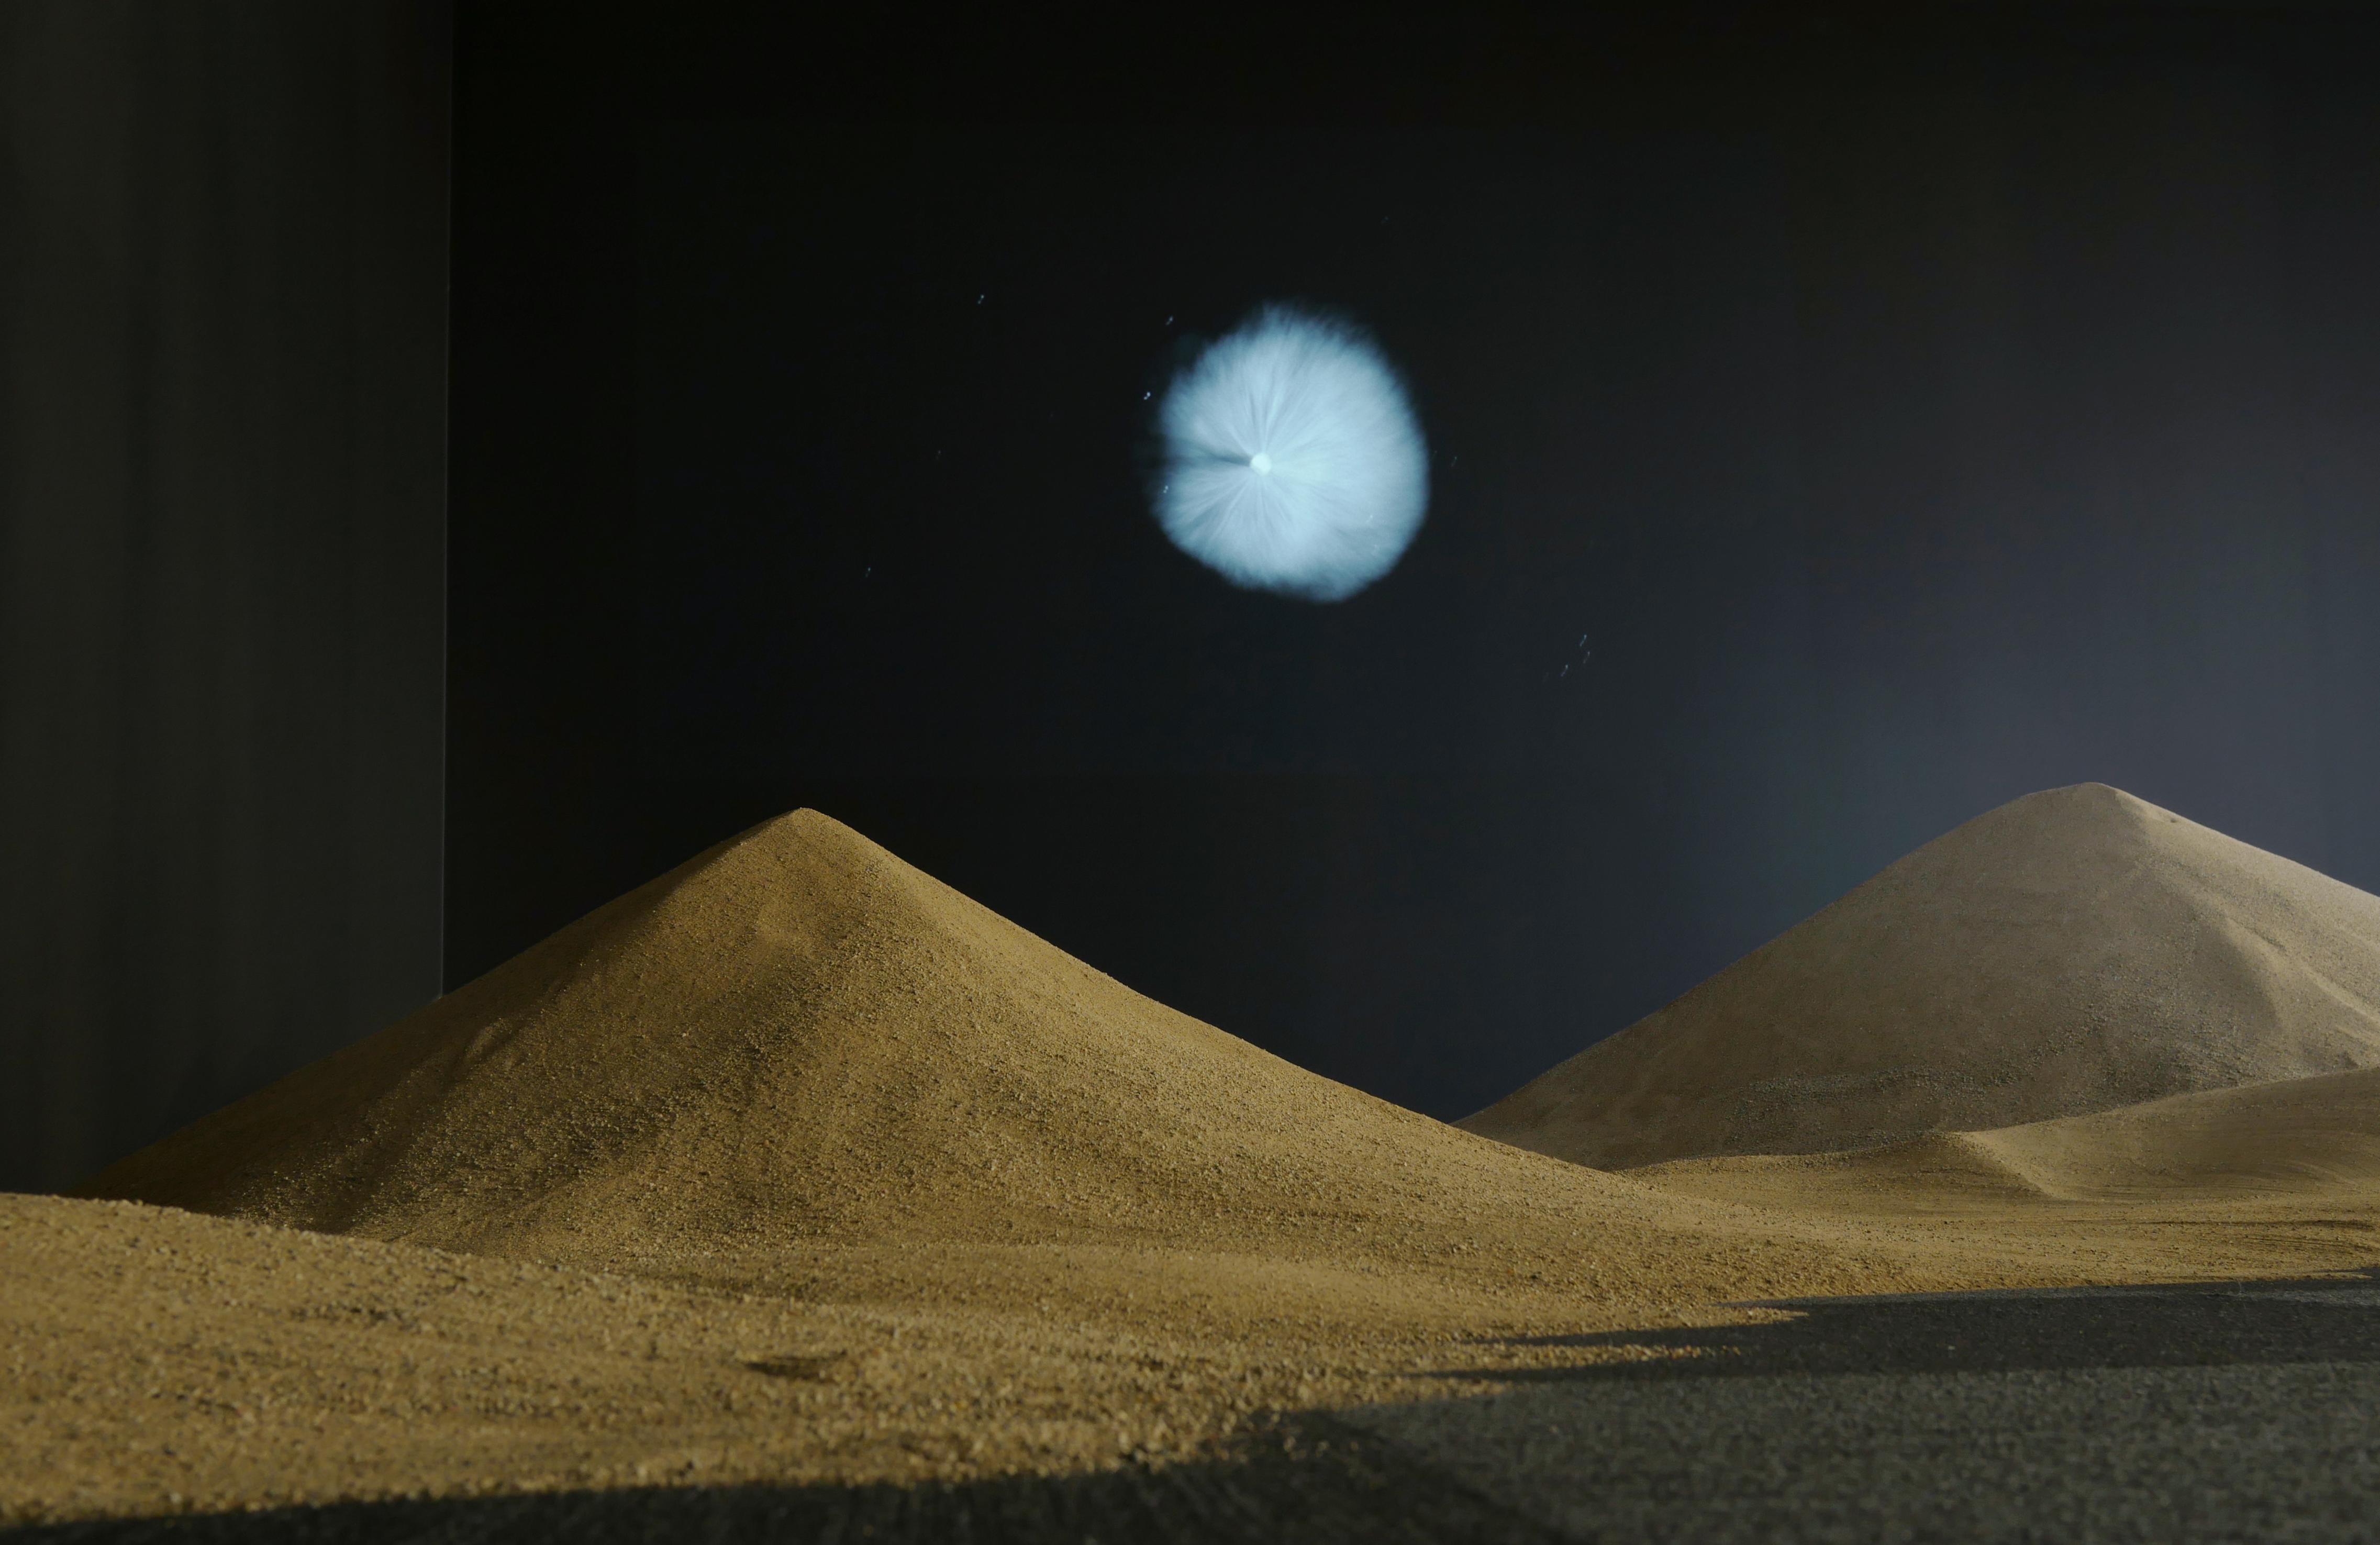 Two dunes of sand are dimly lit in a dark room. Above them is a video projection of a light or some astronomical event.